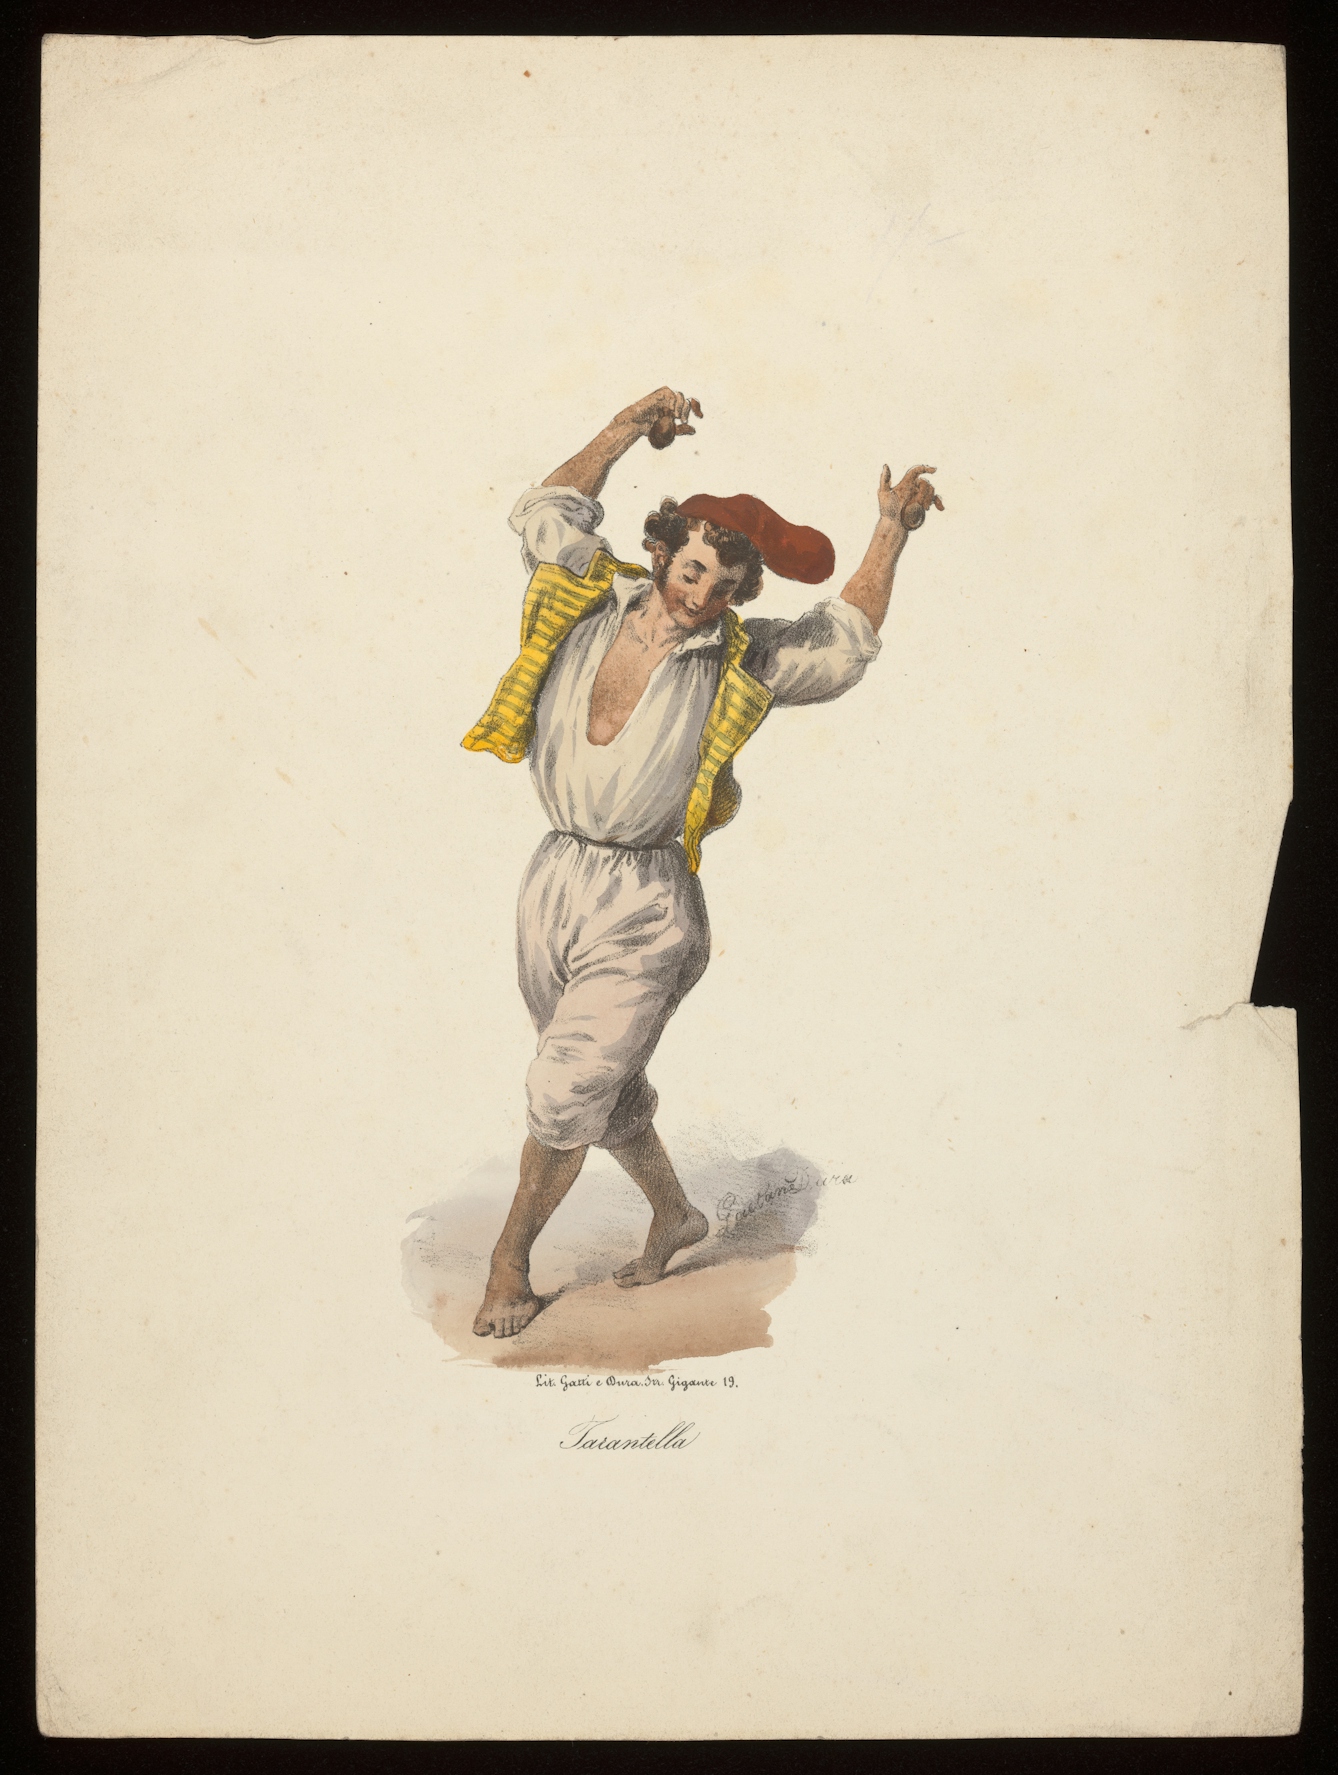 Coloured ink drawing of a young man with his hands in the air